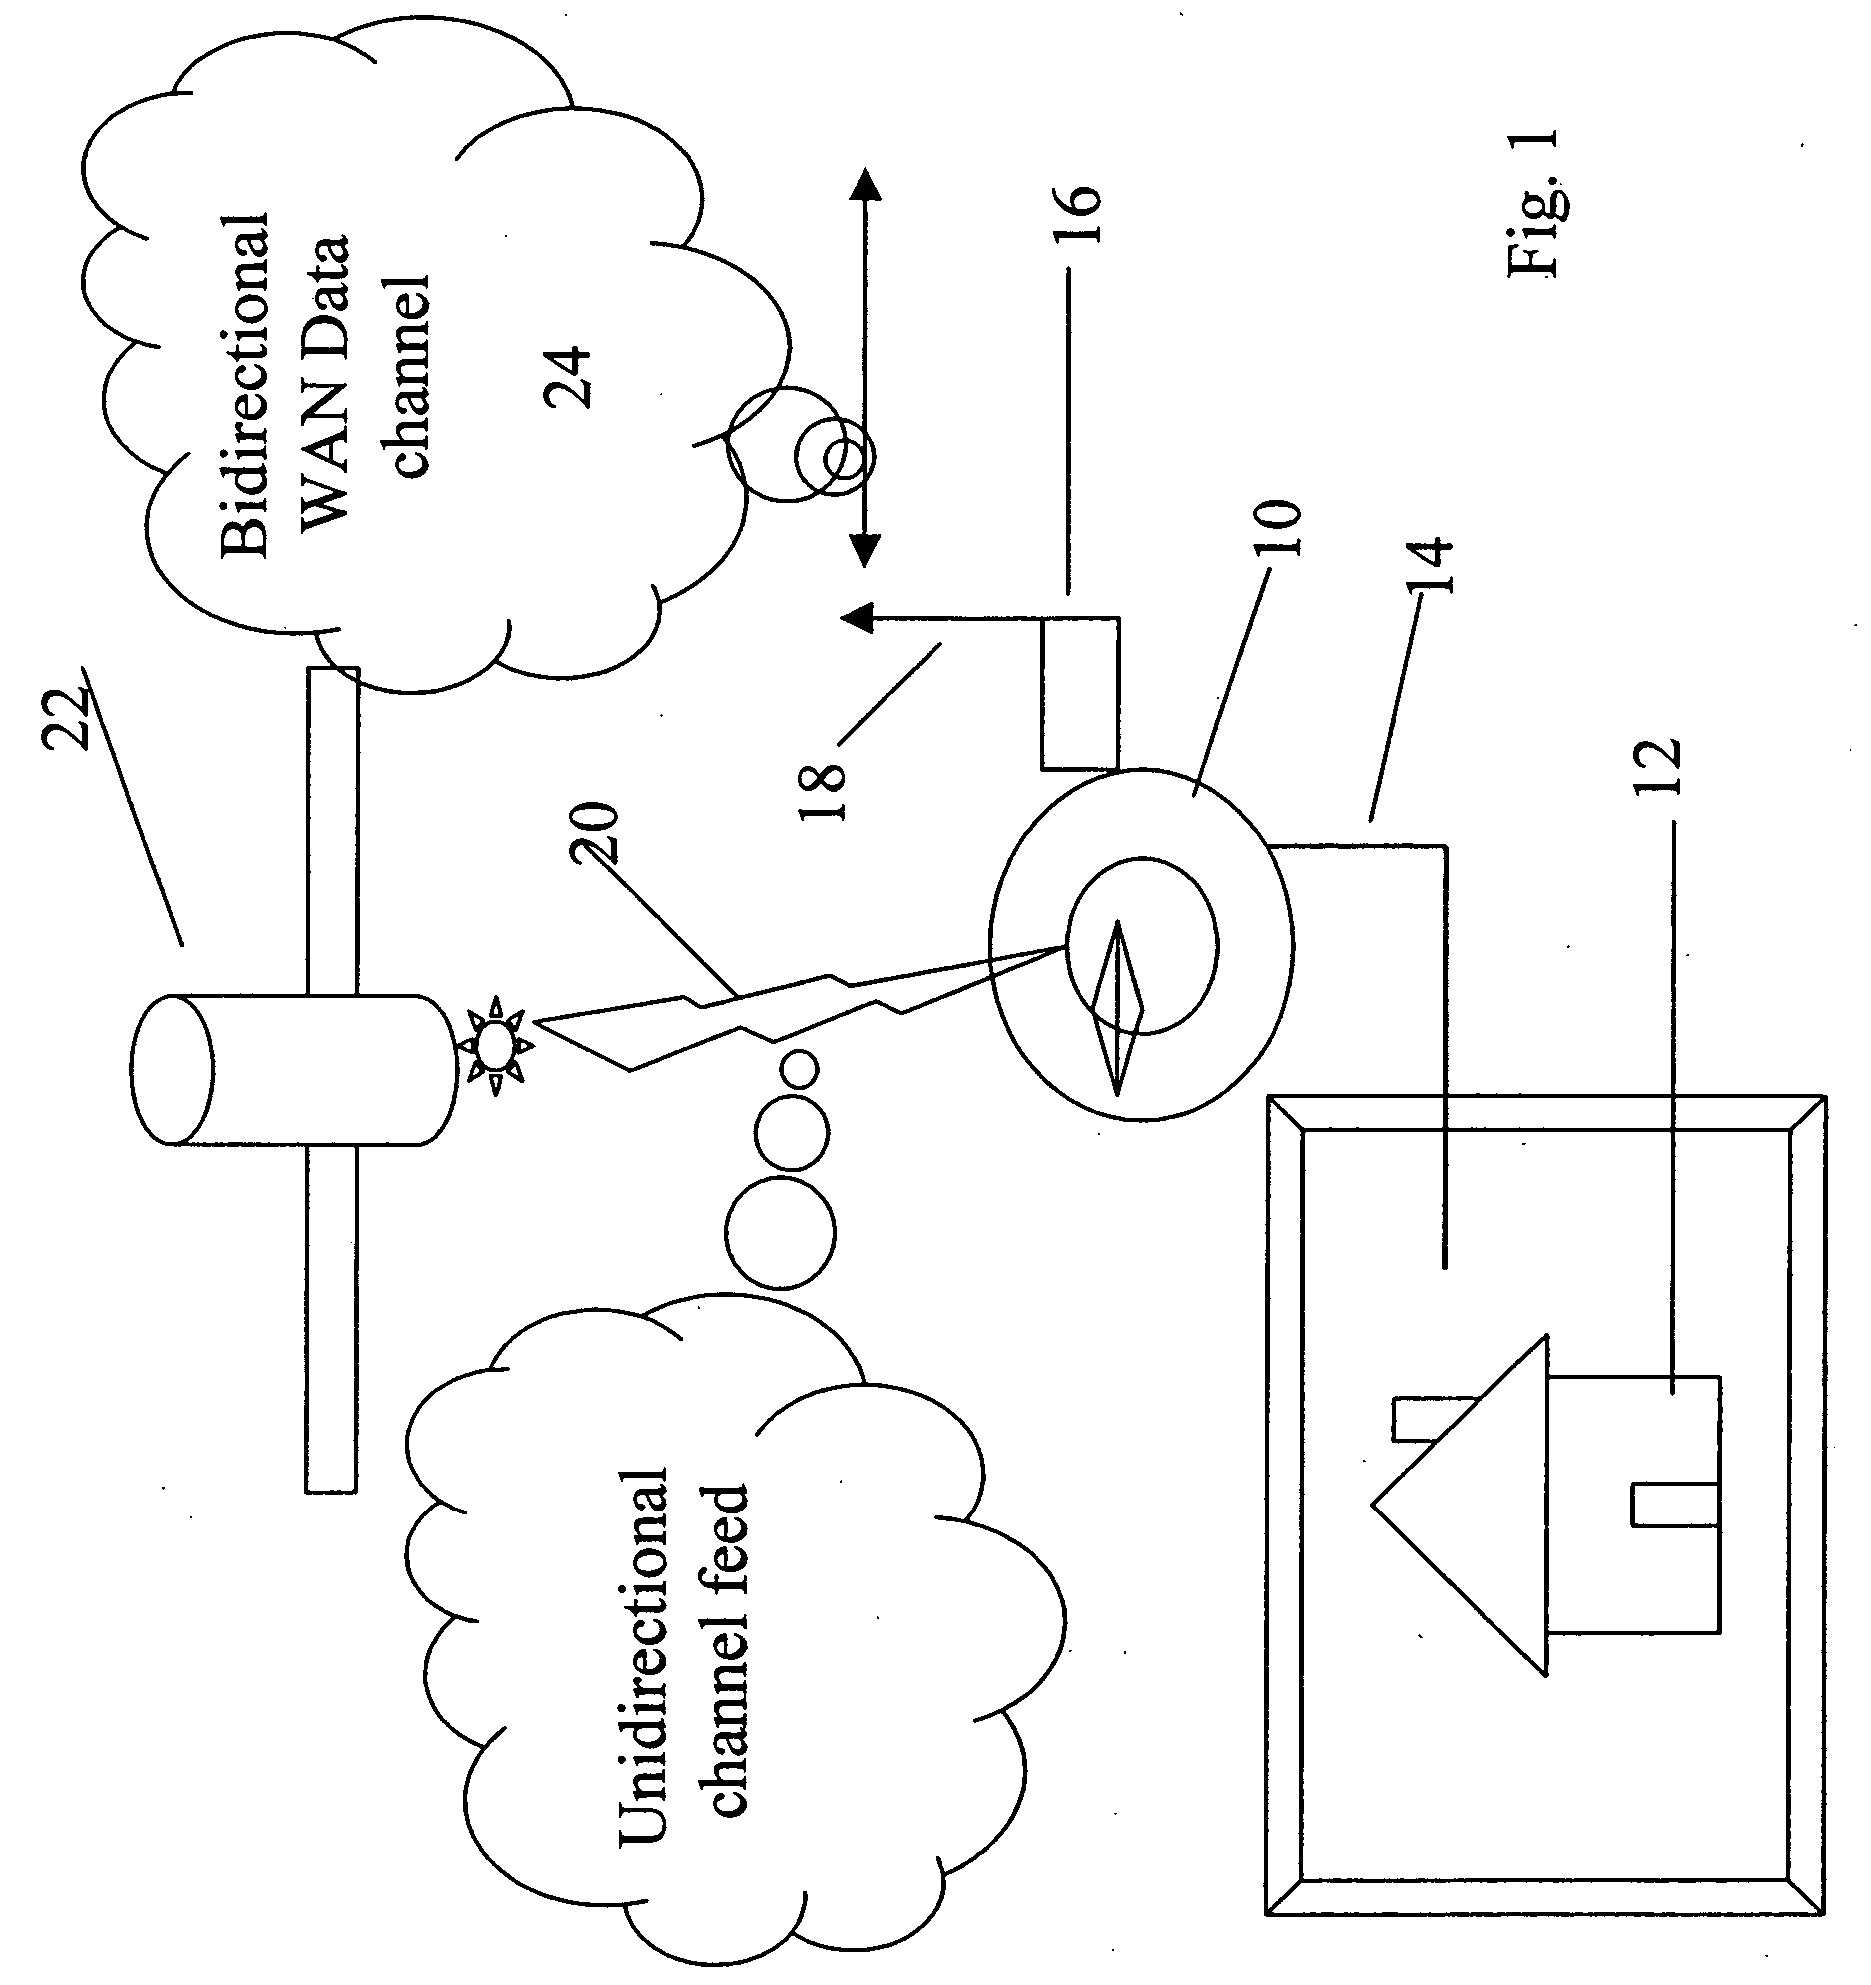 Head end installation for broadcasting with return channel